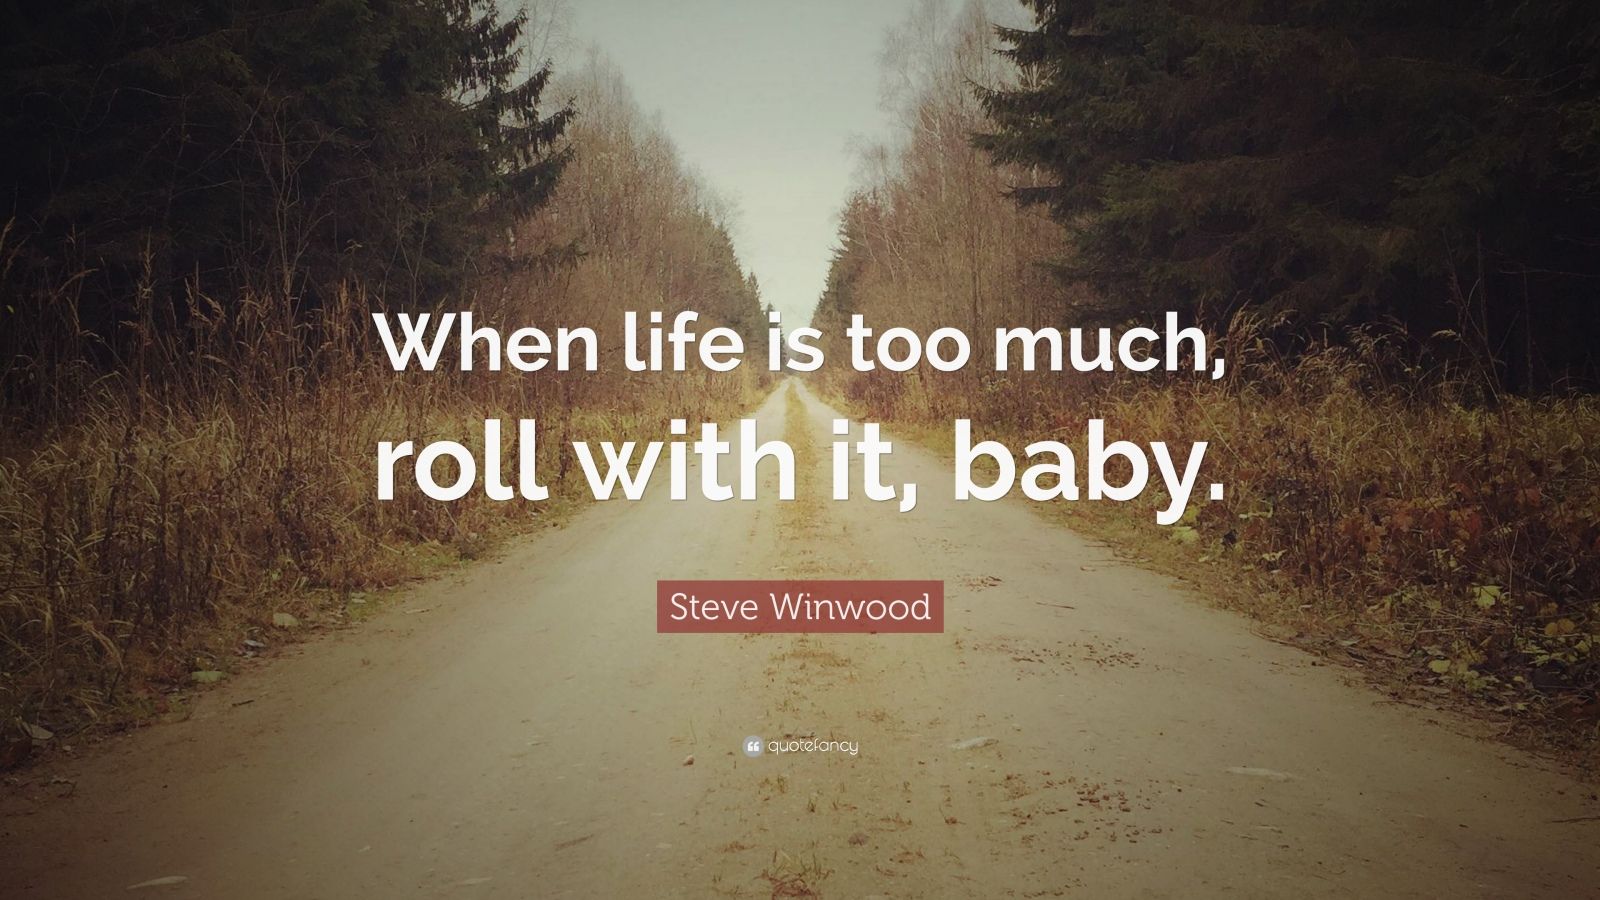 roll with it baby steve winwood boobs